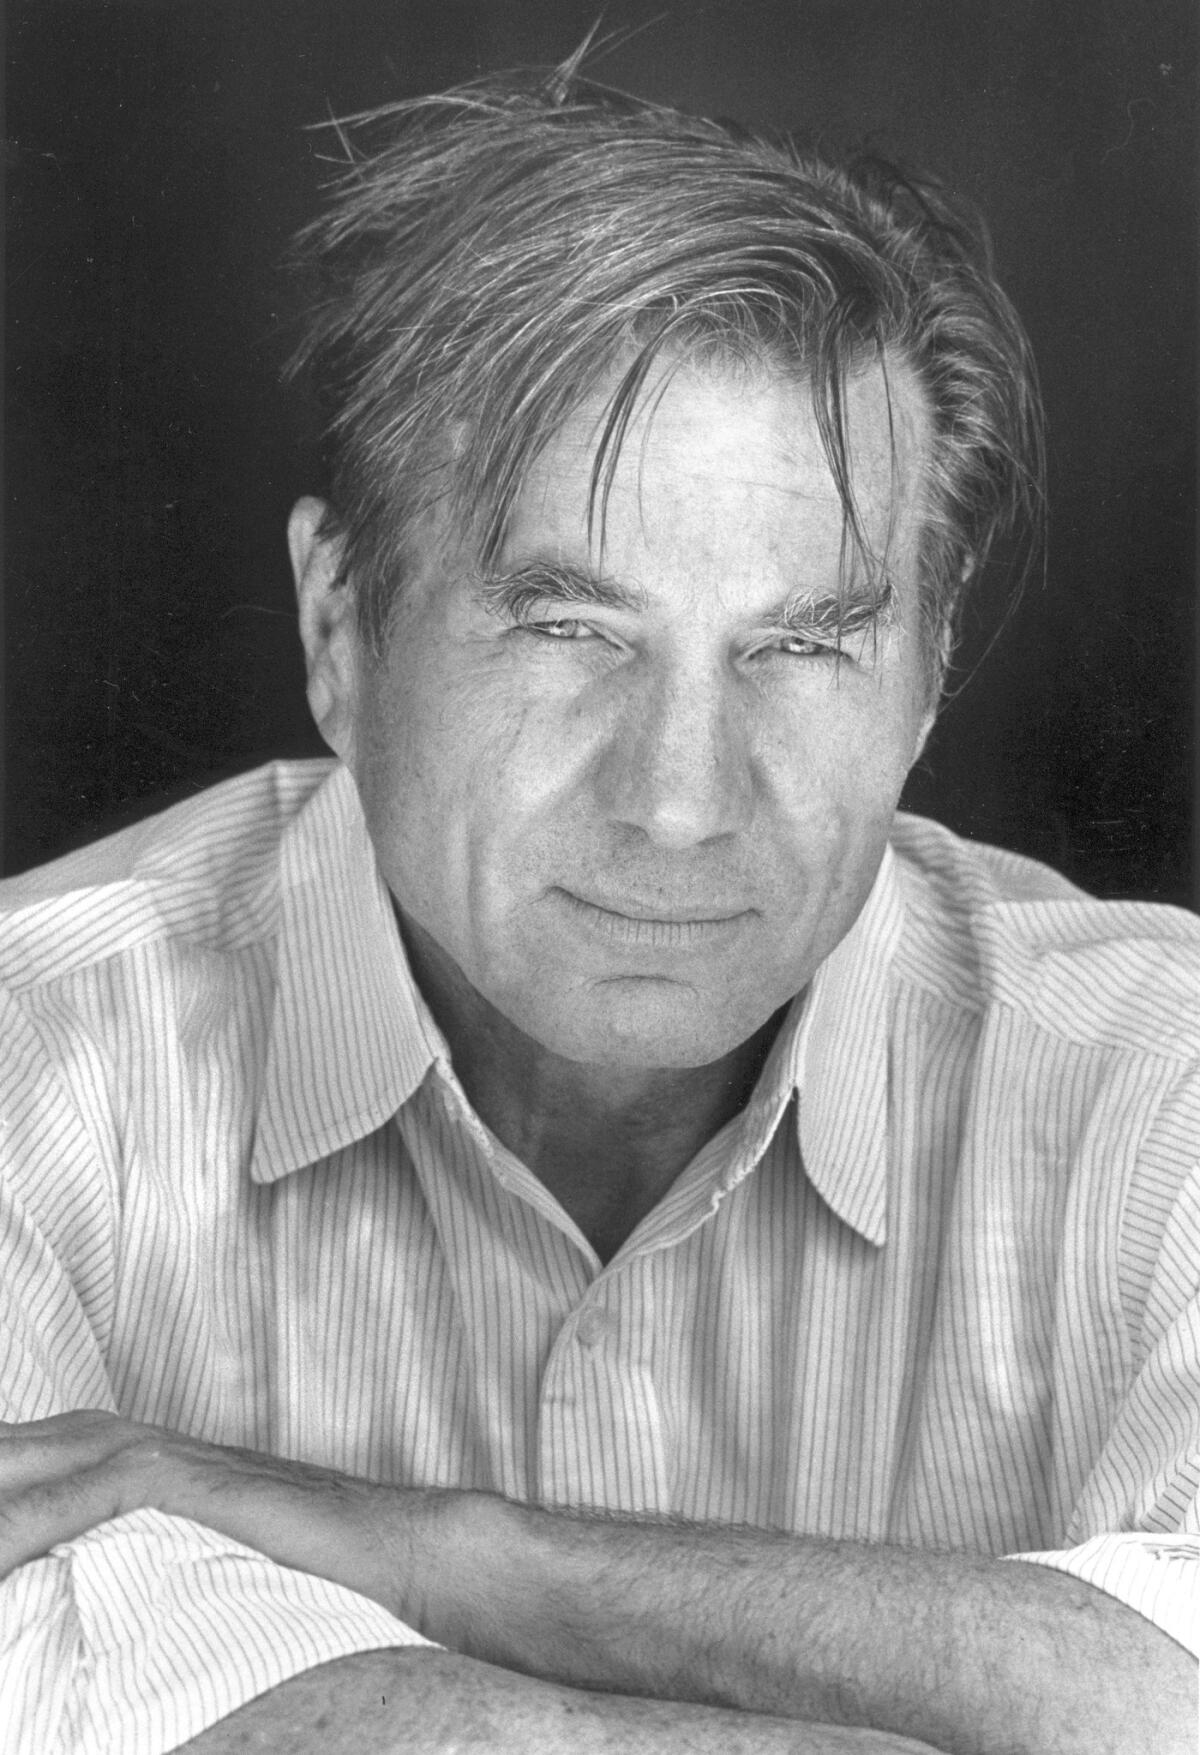 Galway Kinnell in 1985. The highly awarded poet opened up American verse in the 1960s and beyond through his takes on the outsiders and underside of contemporary life.